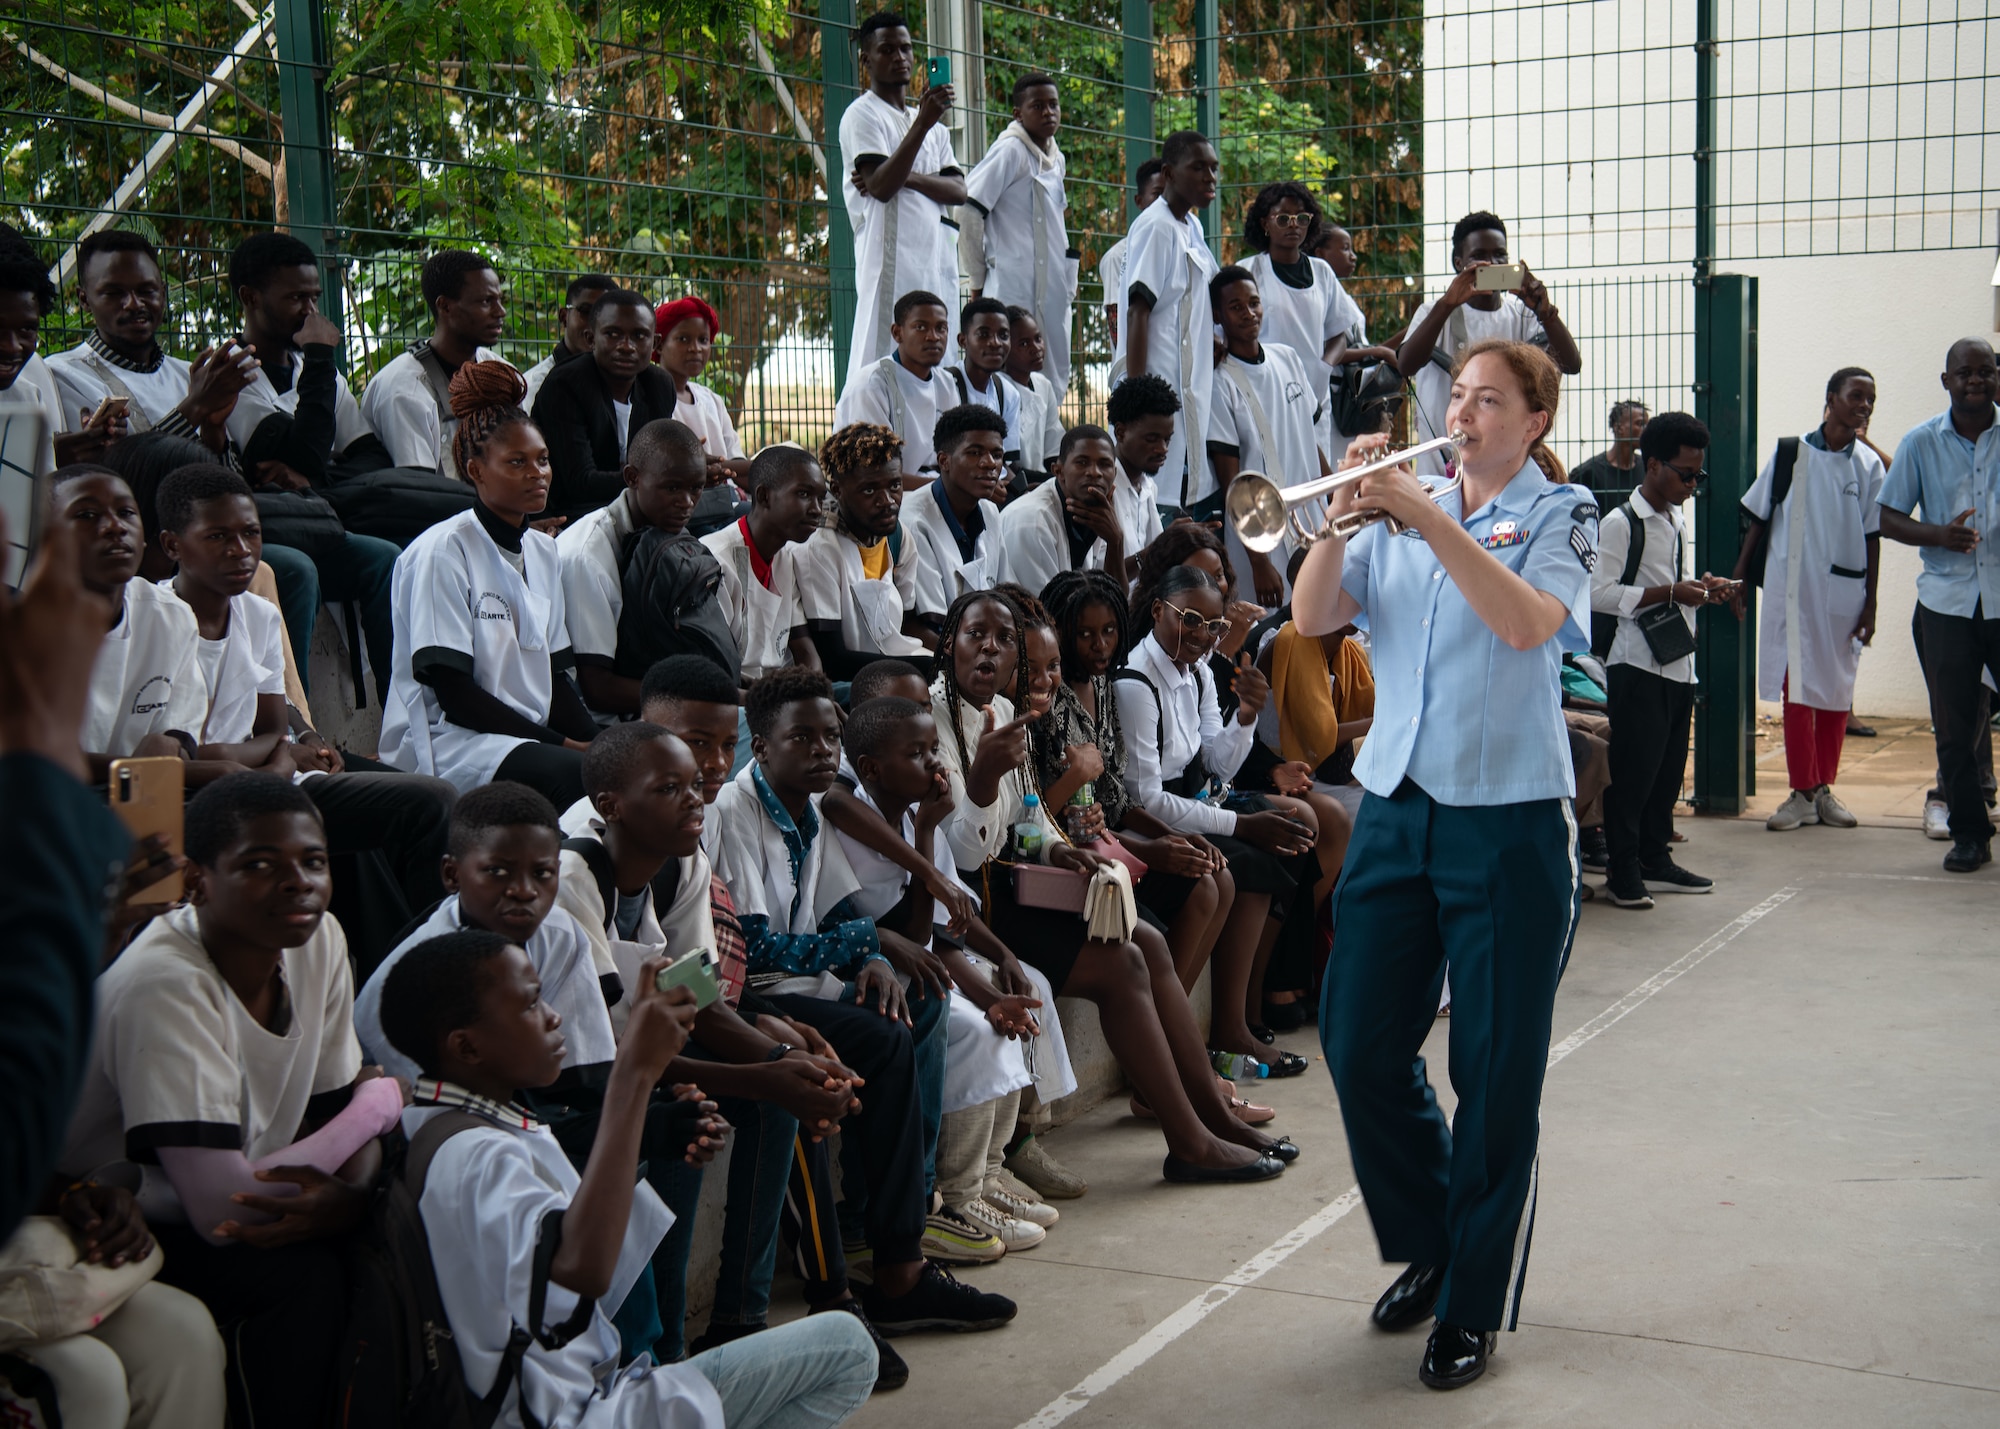 U.S. Air Force Senior Airman Clare Hogan, from the USAFE-AFAFRICA Band, plays the trumpet during a performance for students at the Polytechnic Institute of Art in Kilamba, Angola